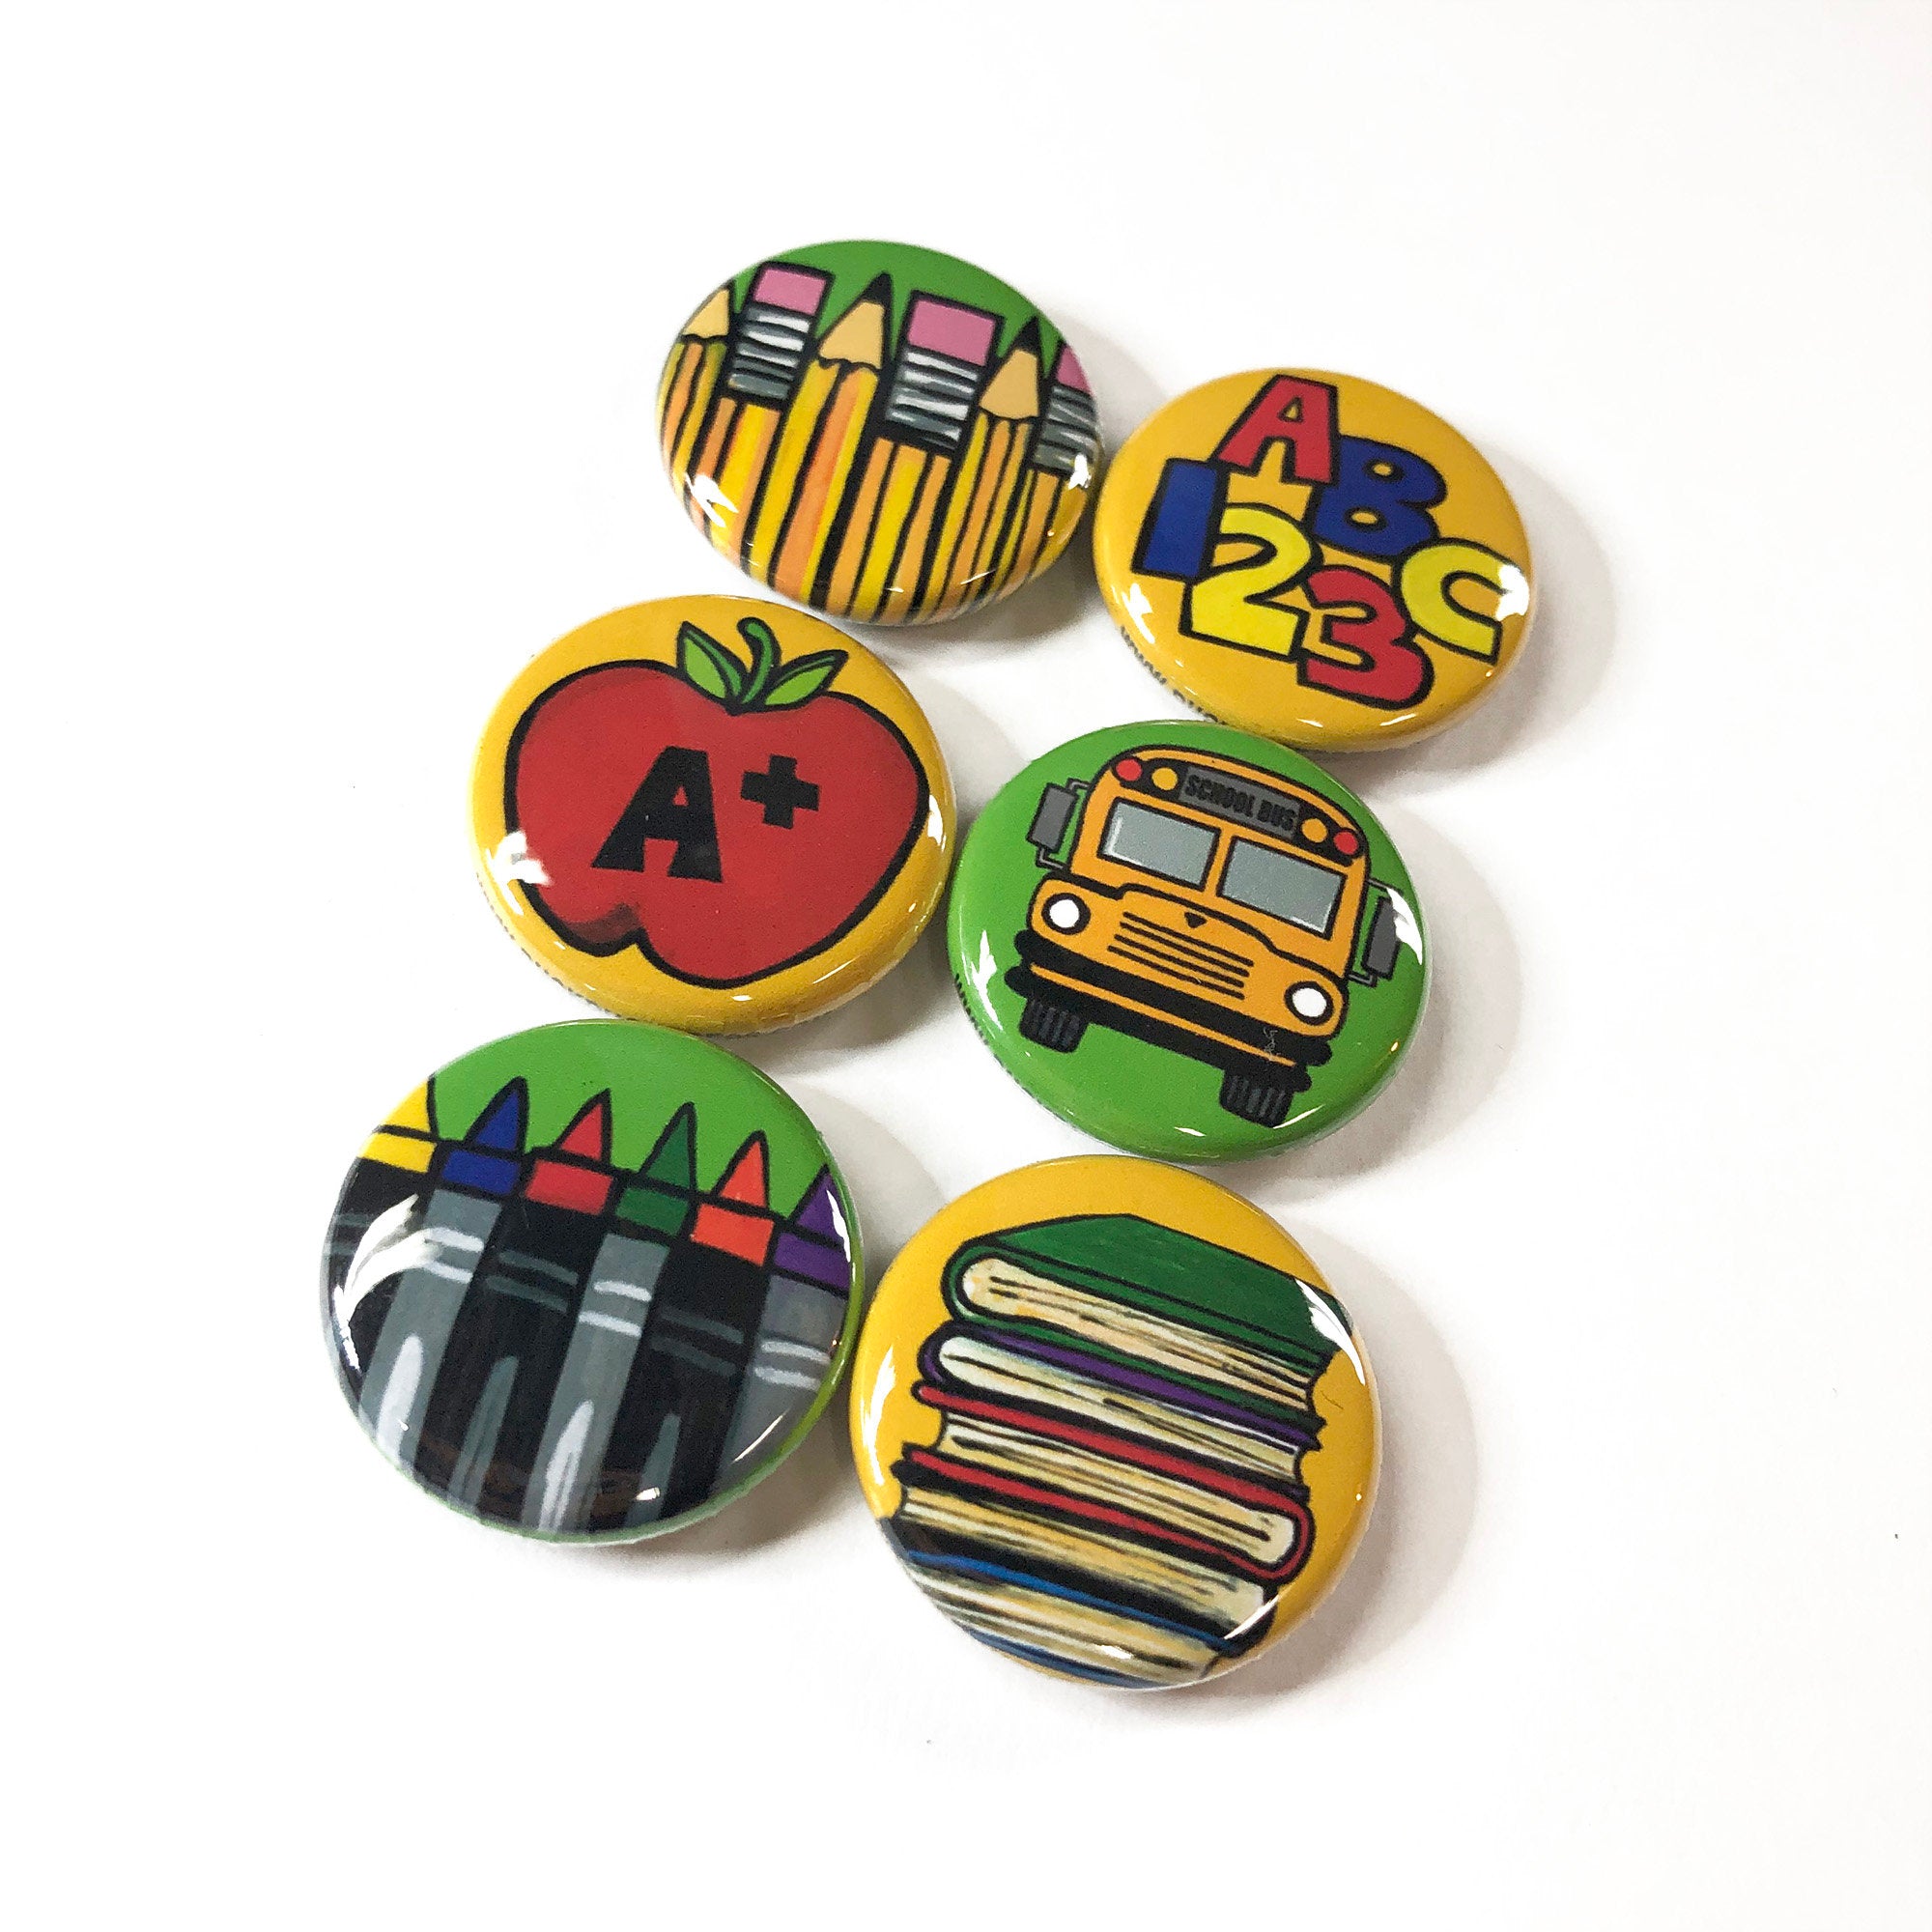 School Magnets or Pinback Buttons